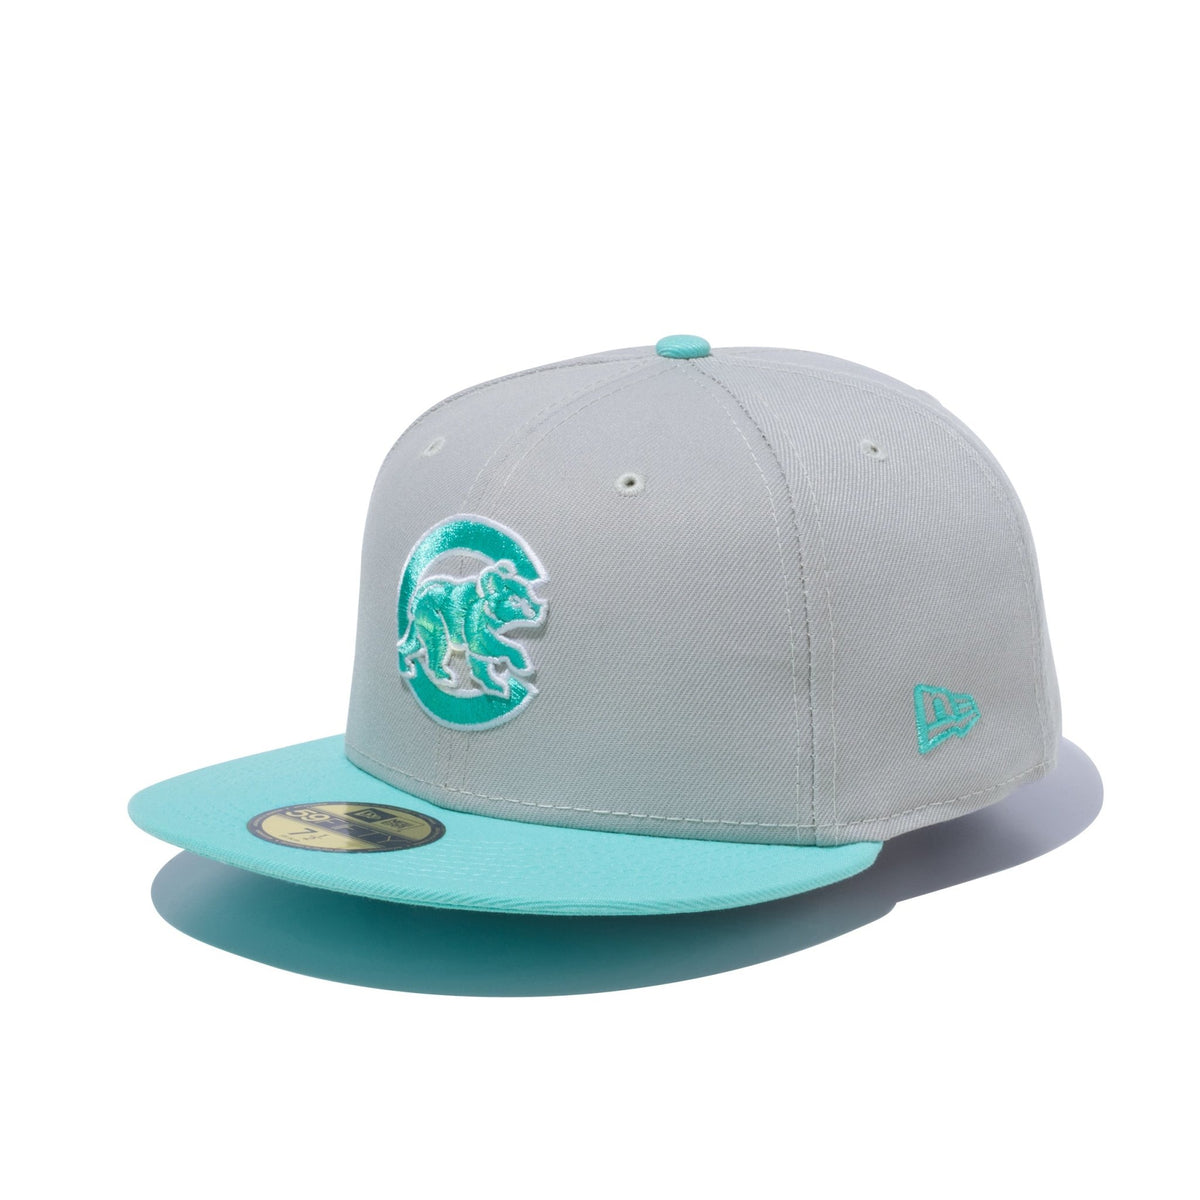 59FIFTY 2Tone Color Pack シカゴ・カブス | ニューエラオンライン